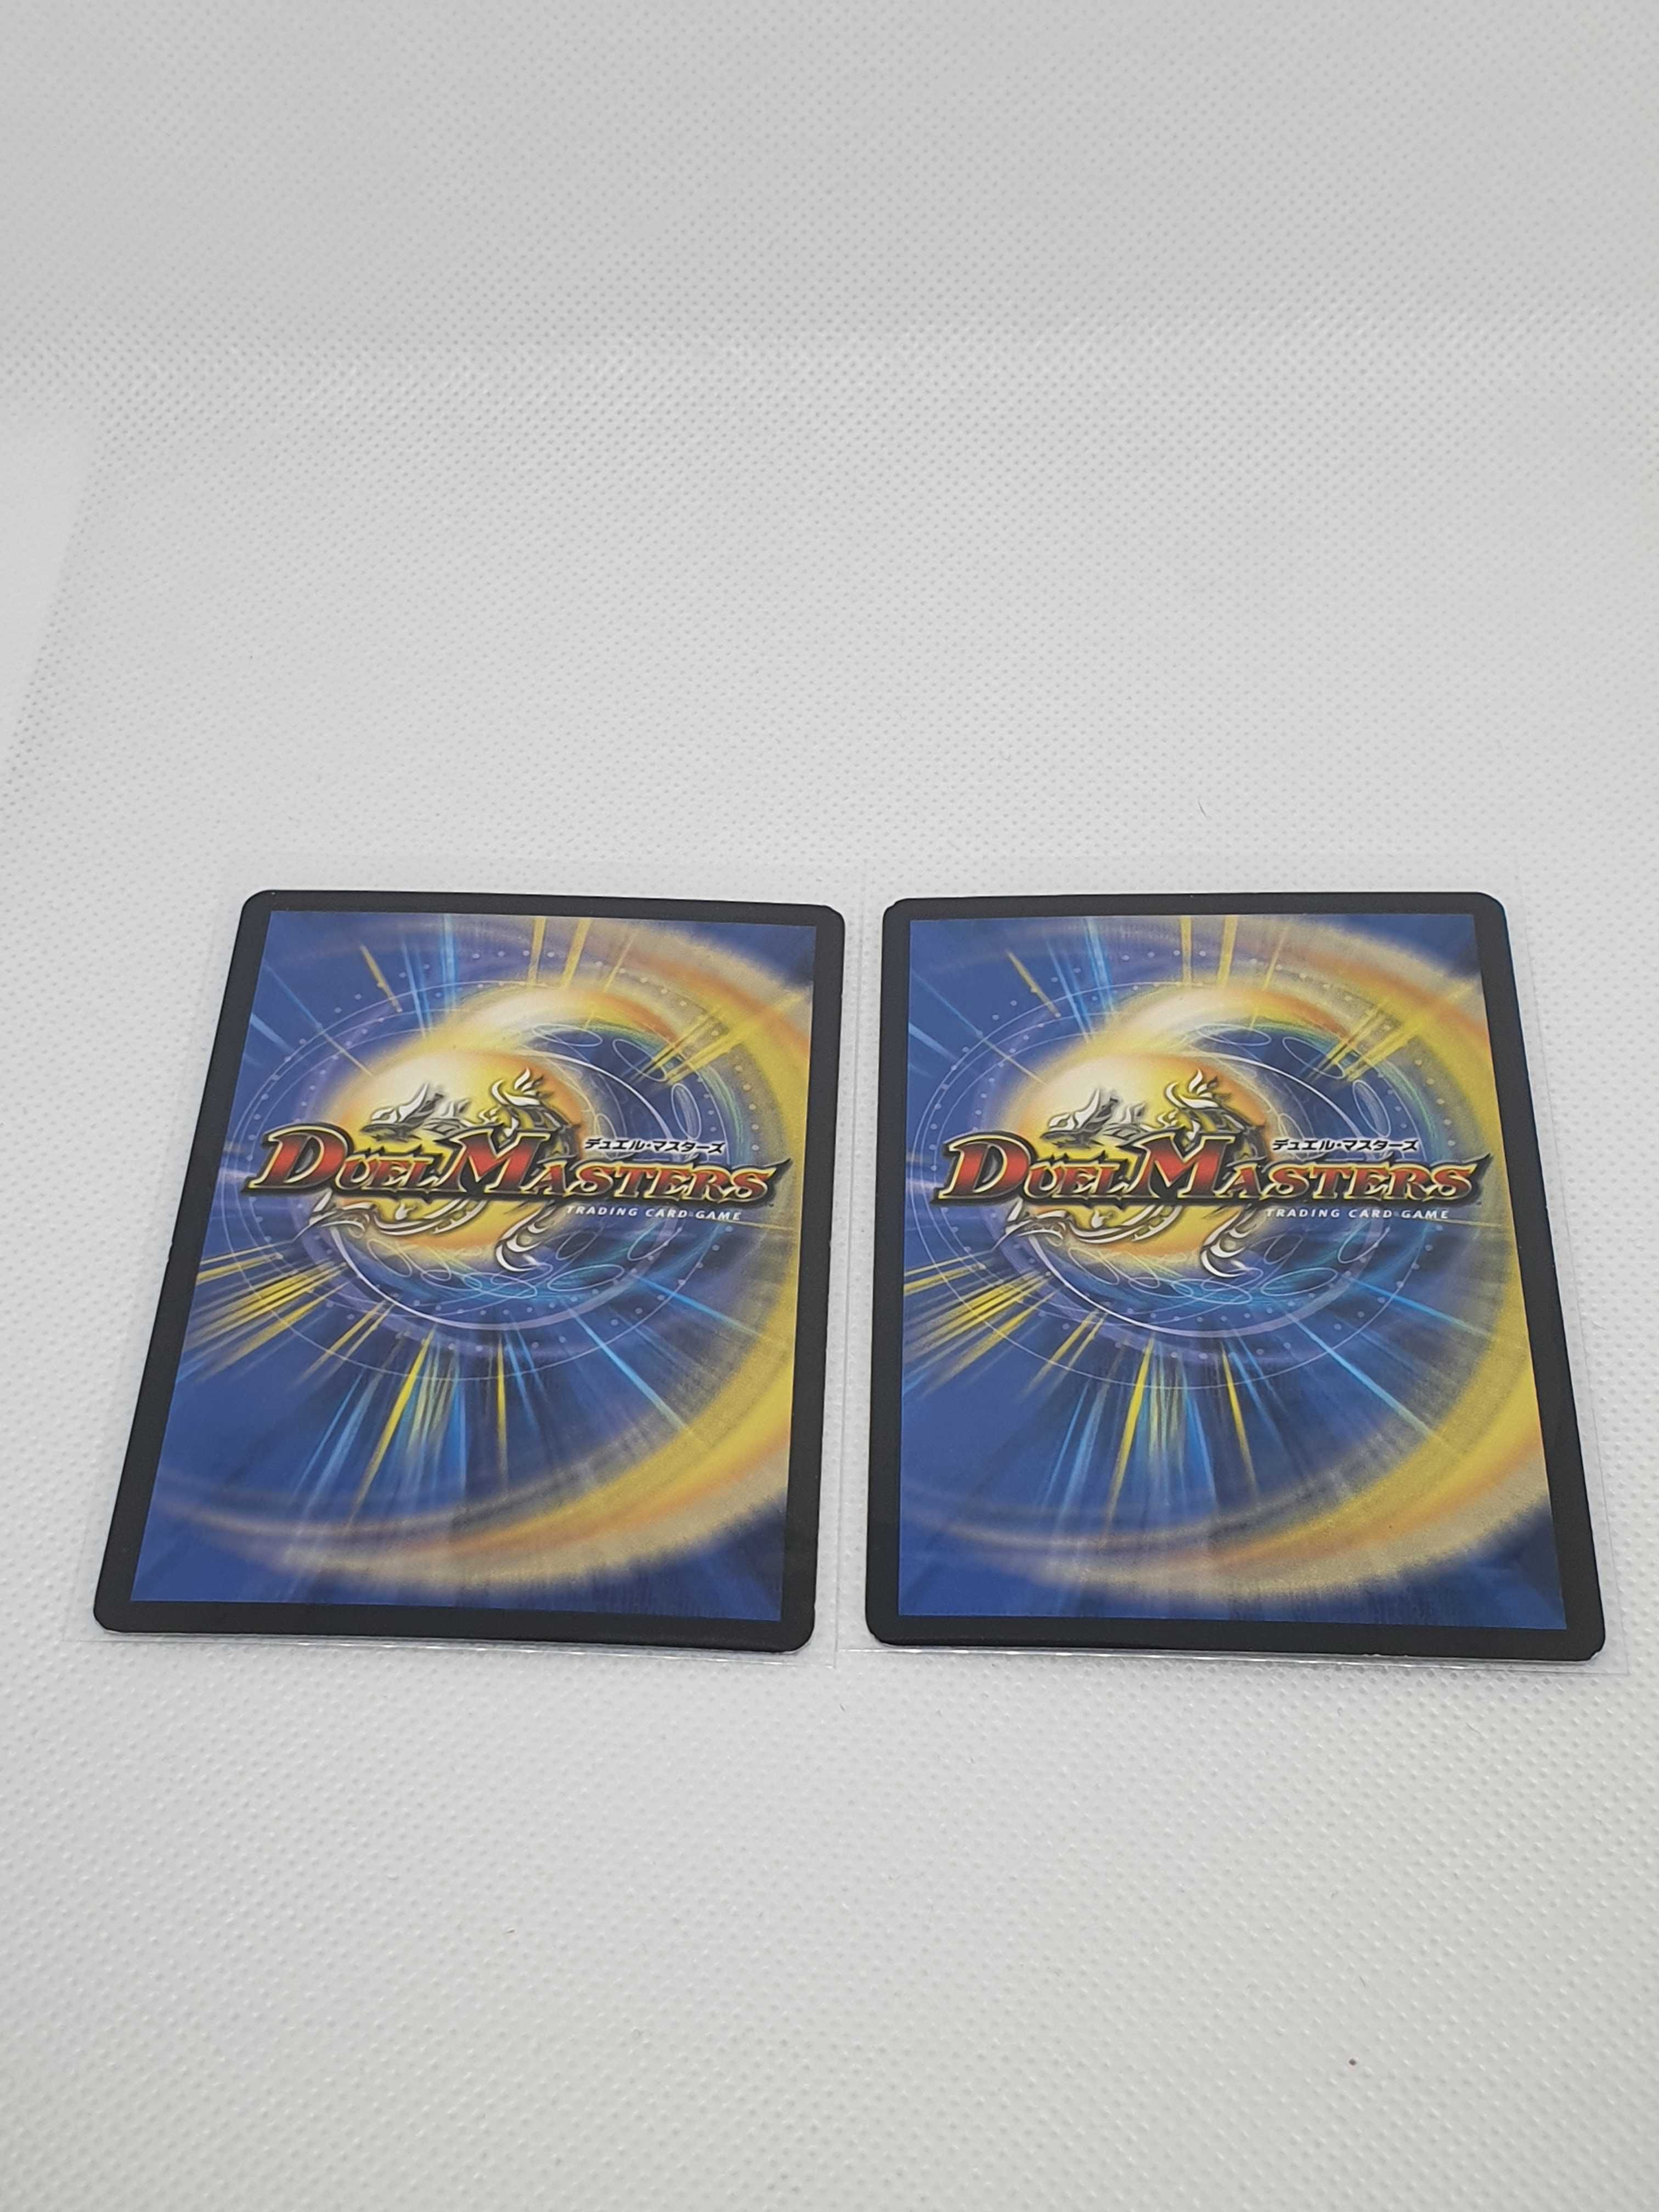 Duel masters, Lost Soul x2